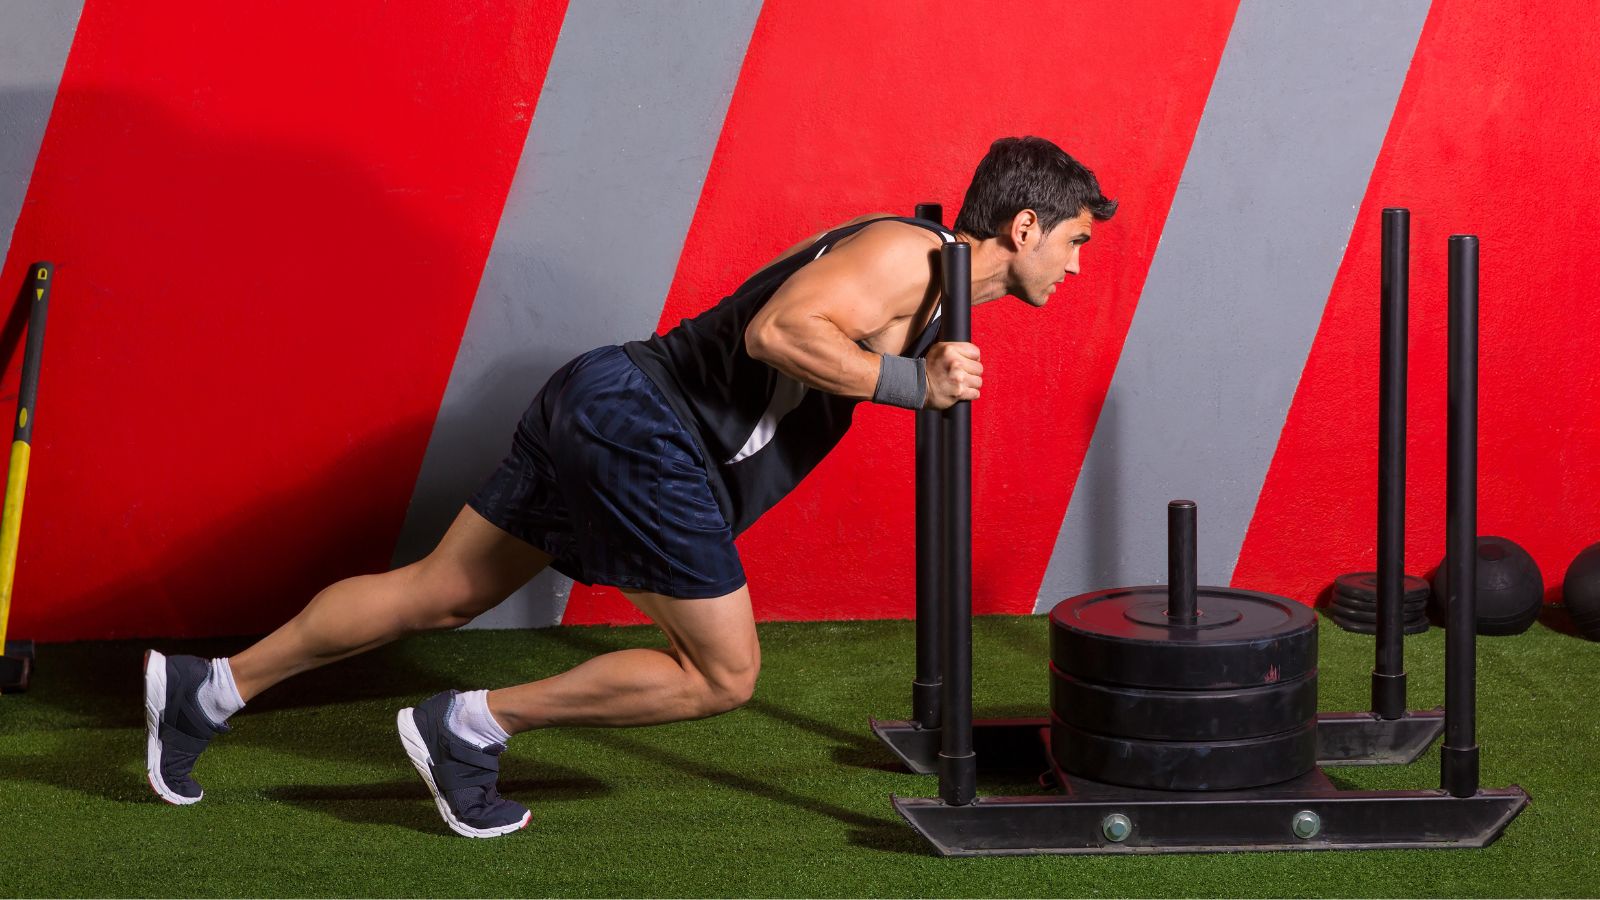 How to Get Better at Push-Ups If You Can't Do Any: Scaled Exercises